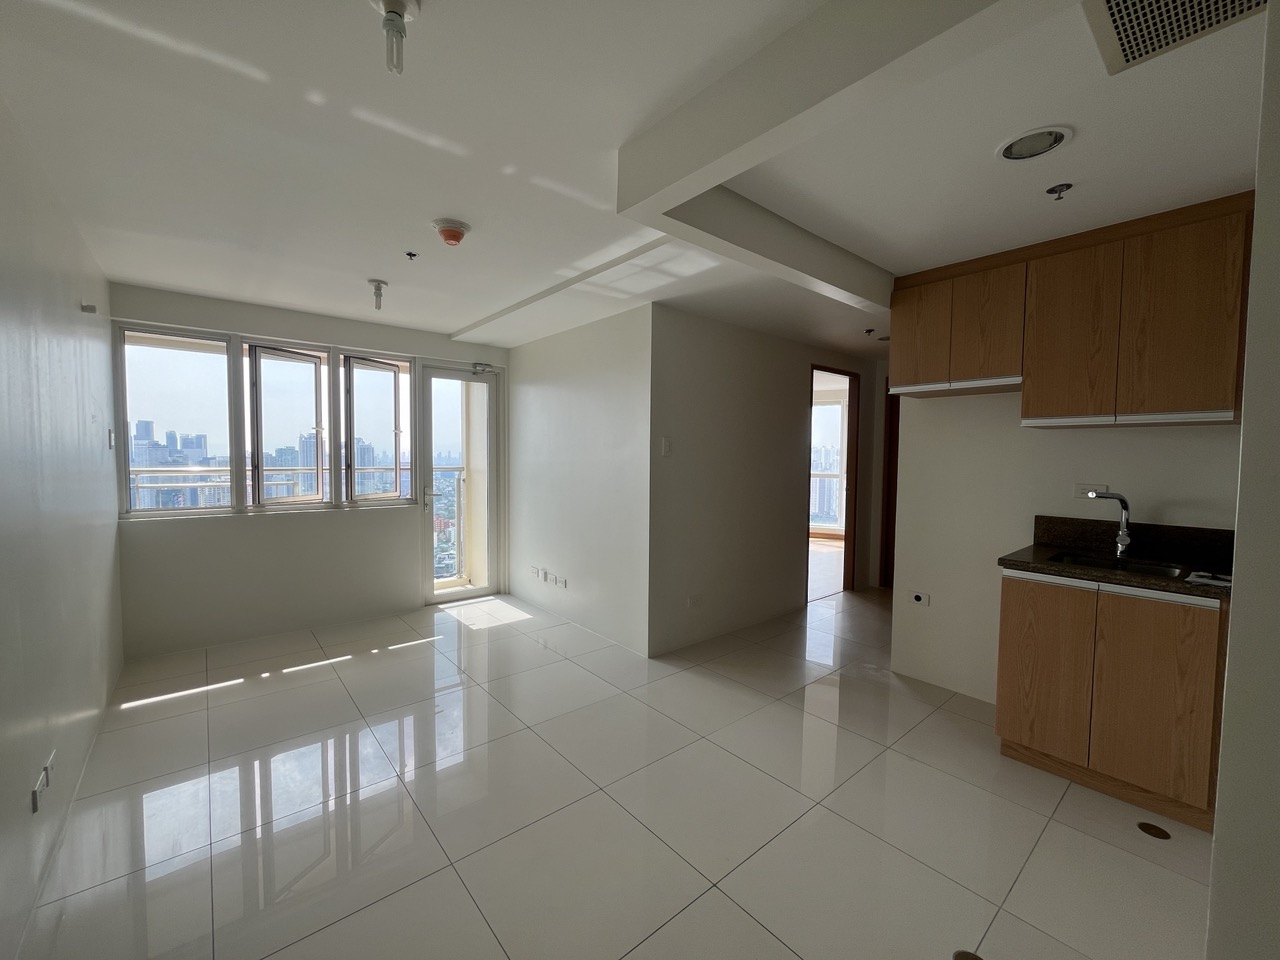 FOR RENT 2BR UNIT WITH BALCONY AT TIME SQUARE WEST